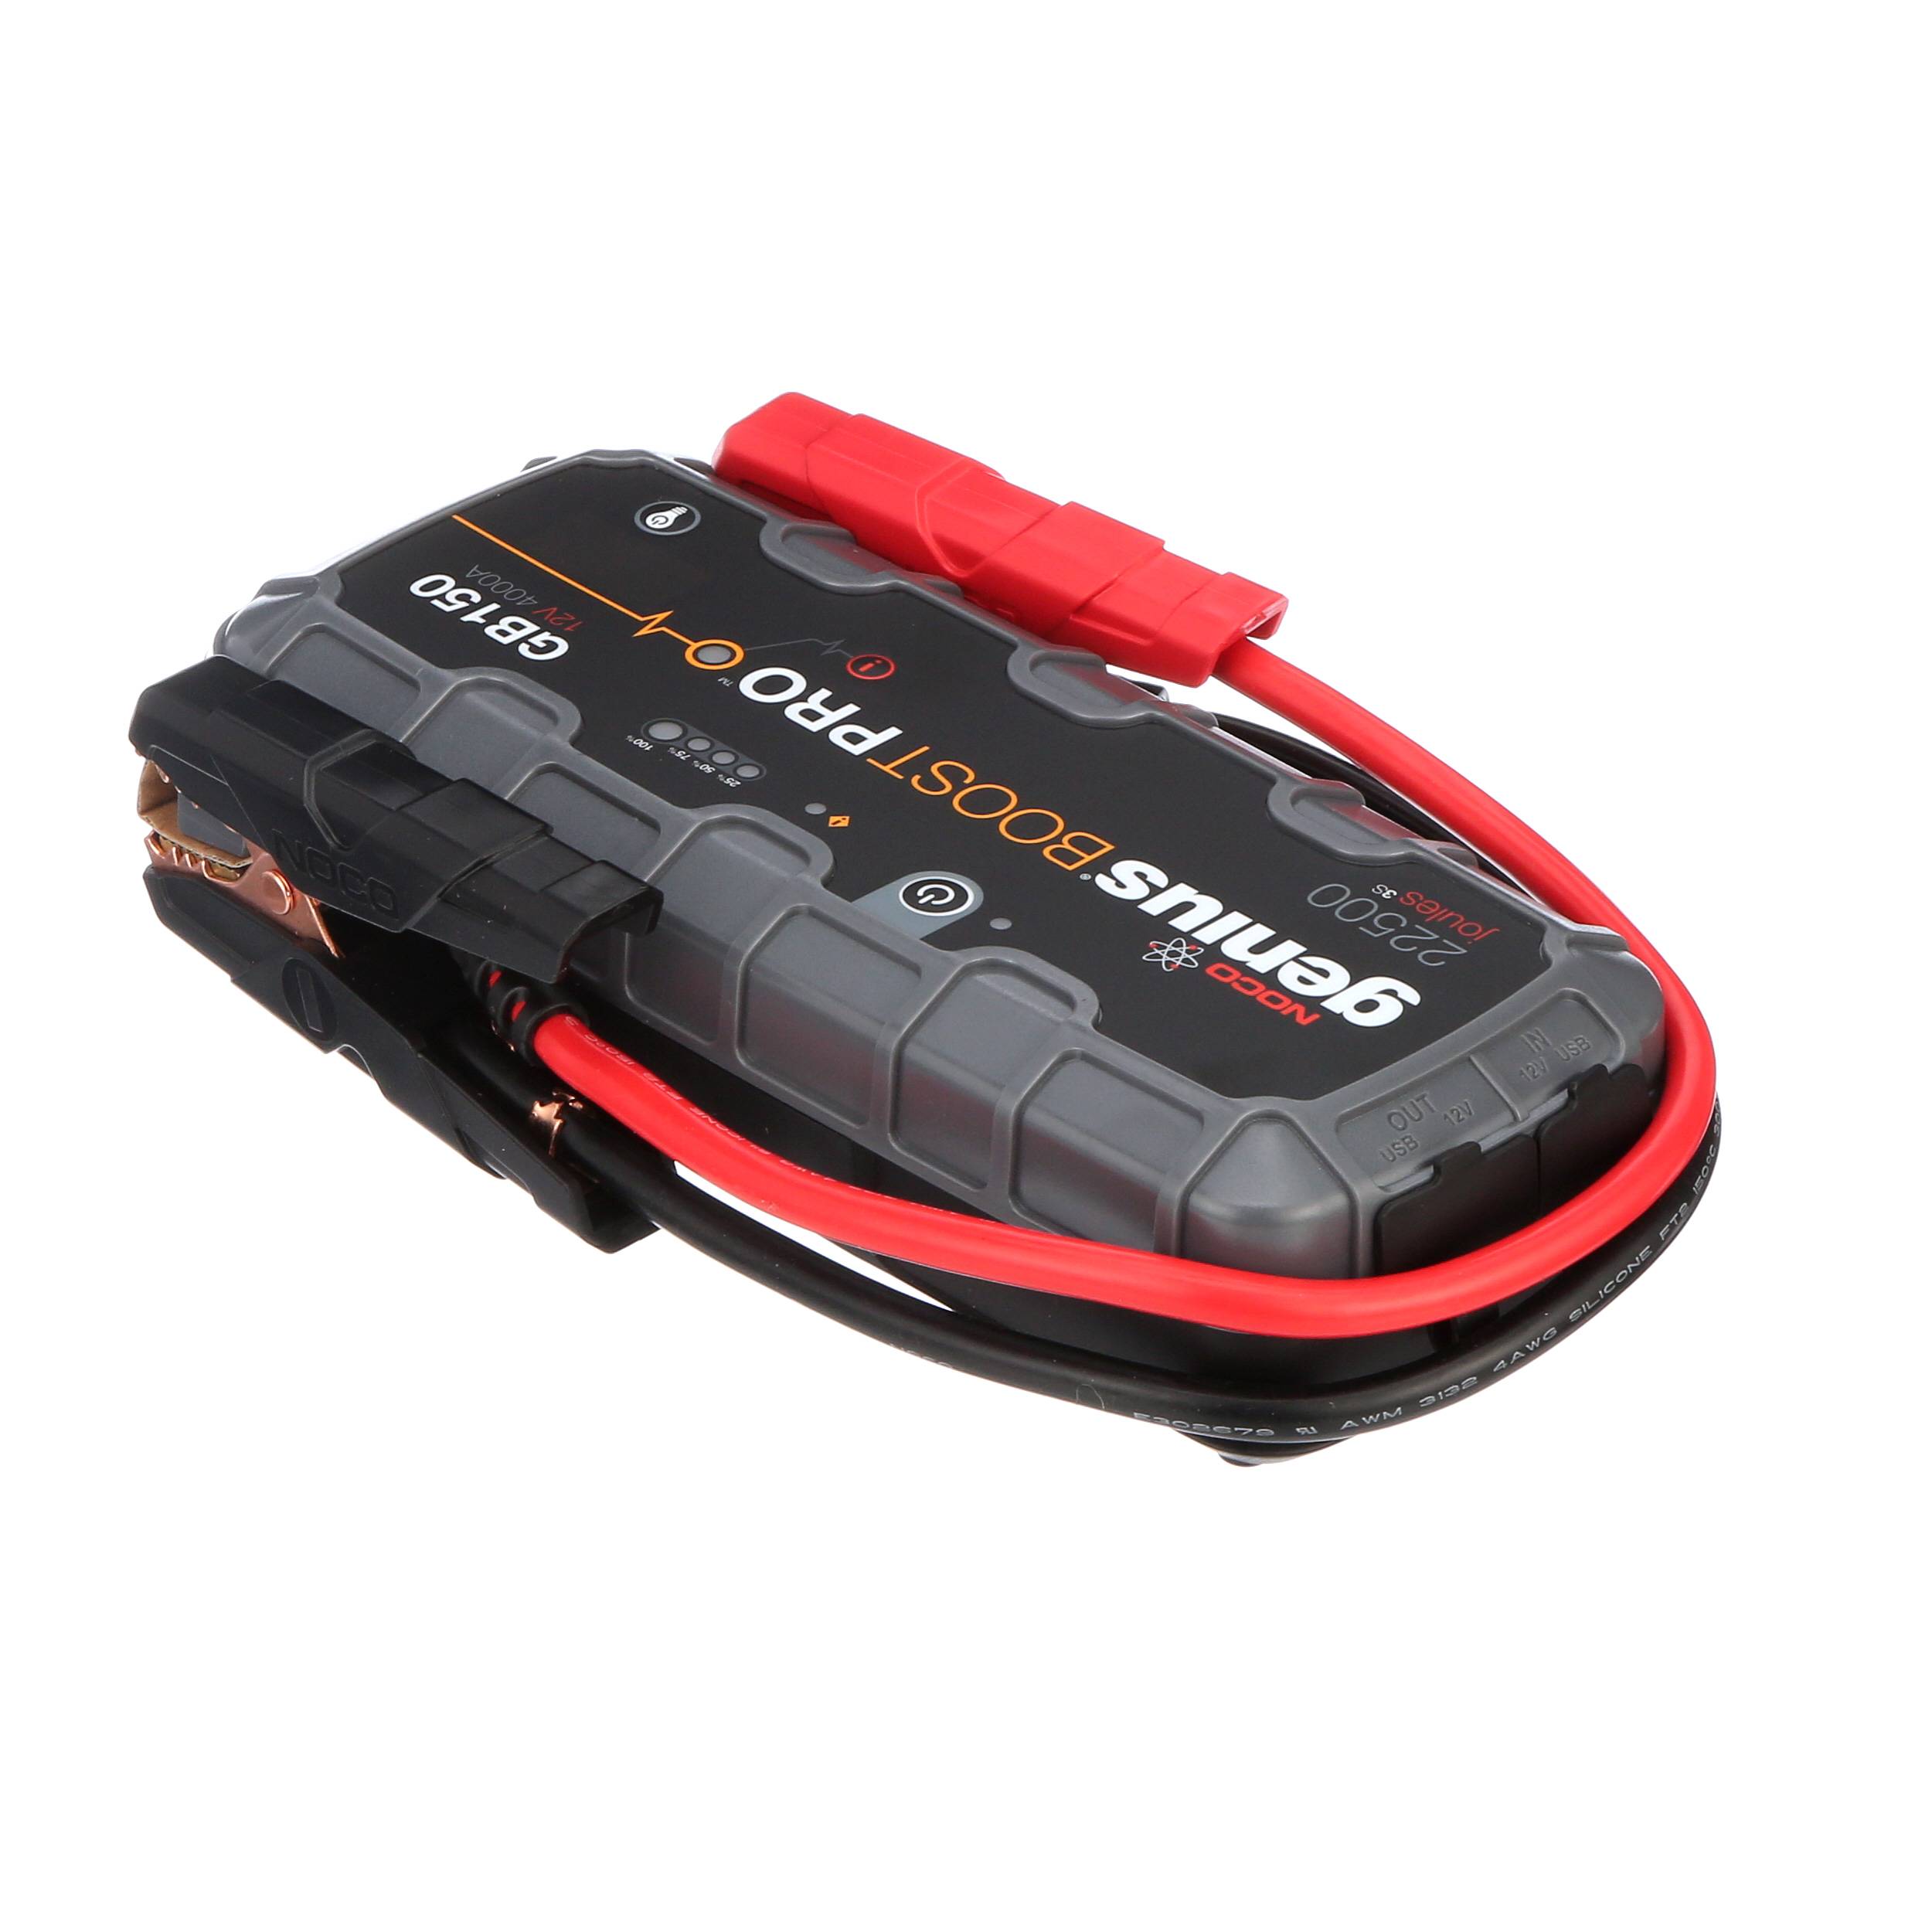 NOCO Boost Pro GB150 3000A 12V UltraSafe Portable Lithium Jump Starter 